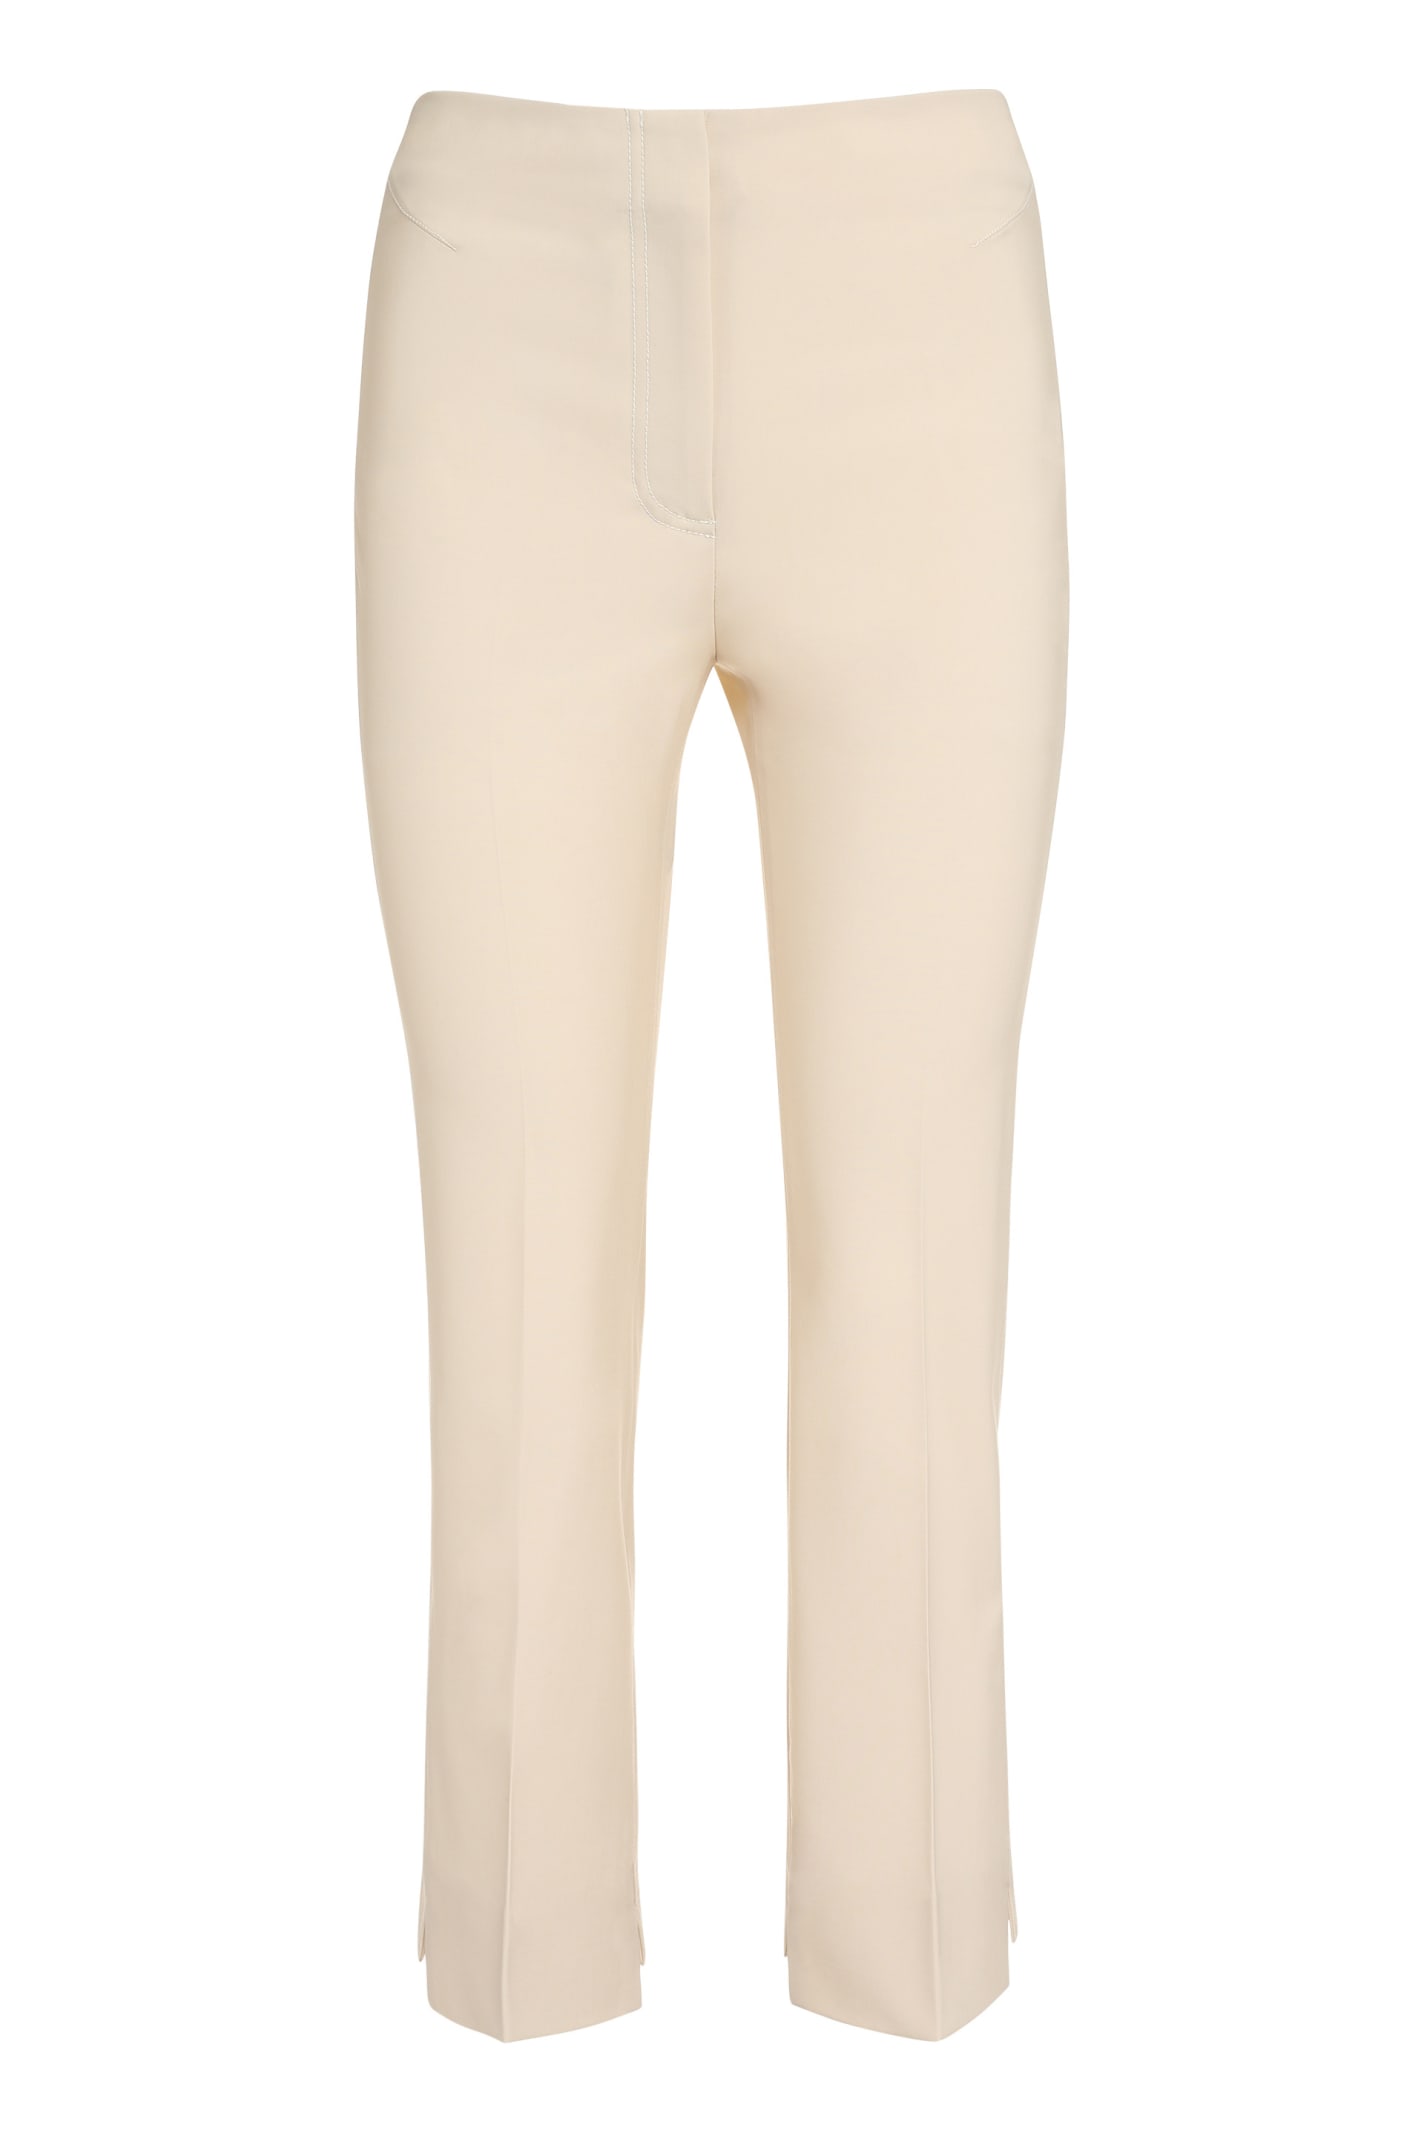 Jacquemus Pina Cropped Trousers In Beige | ModeSens